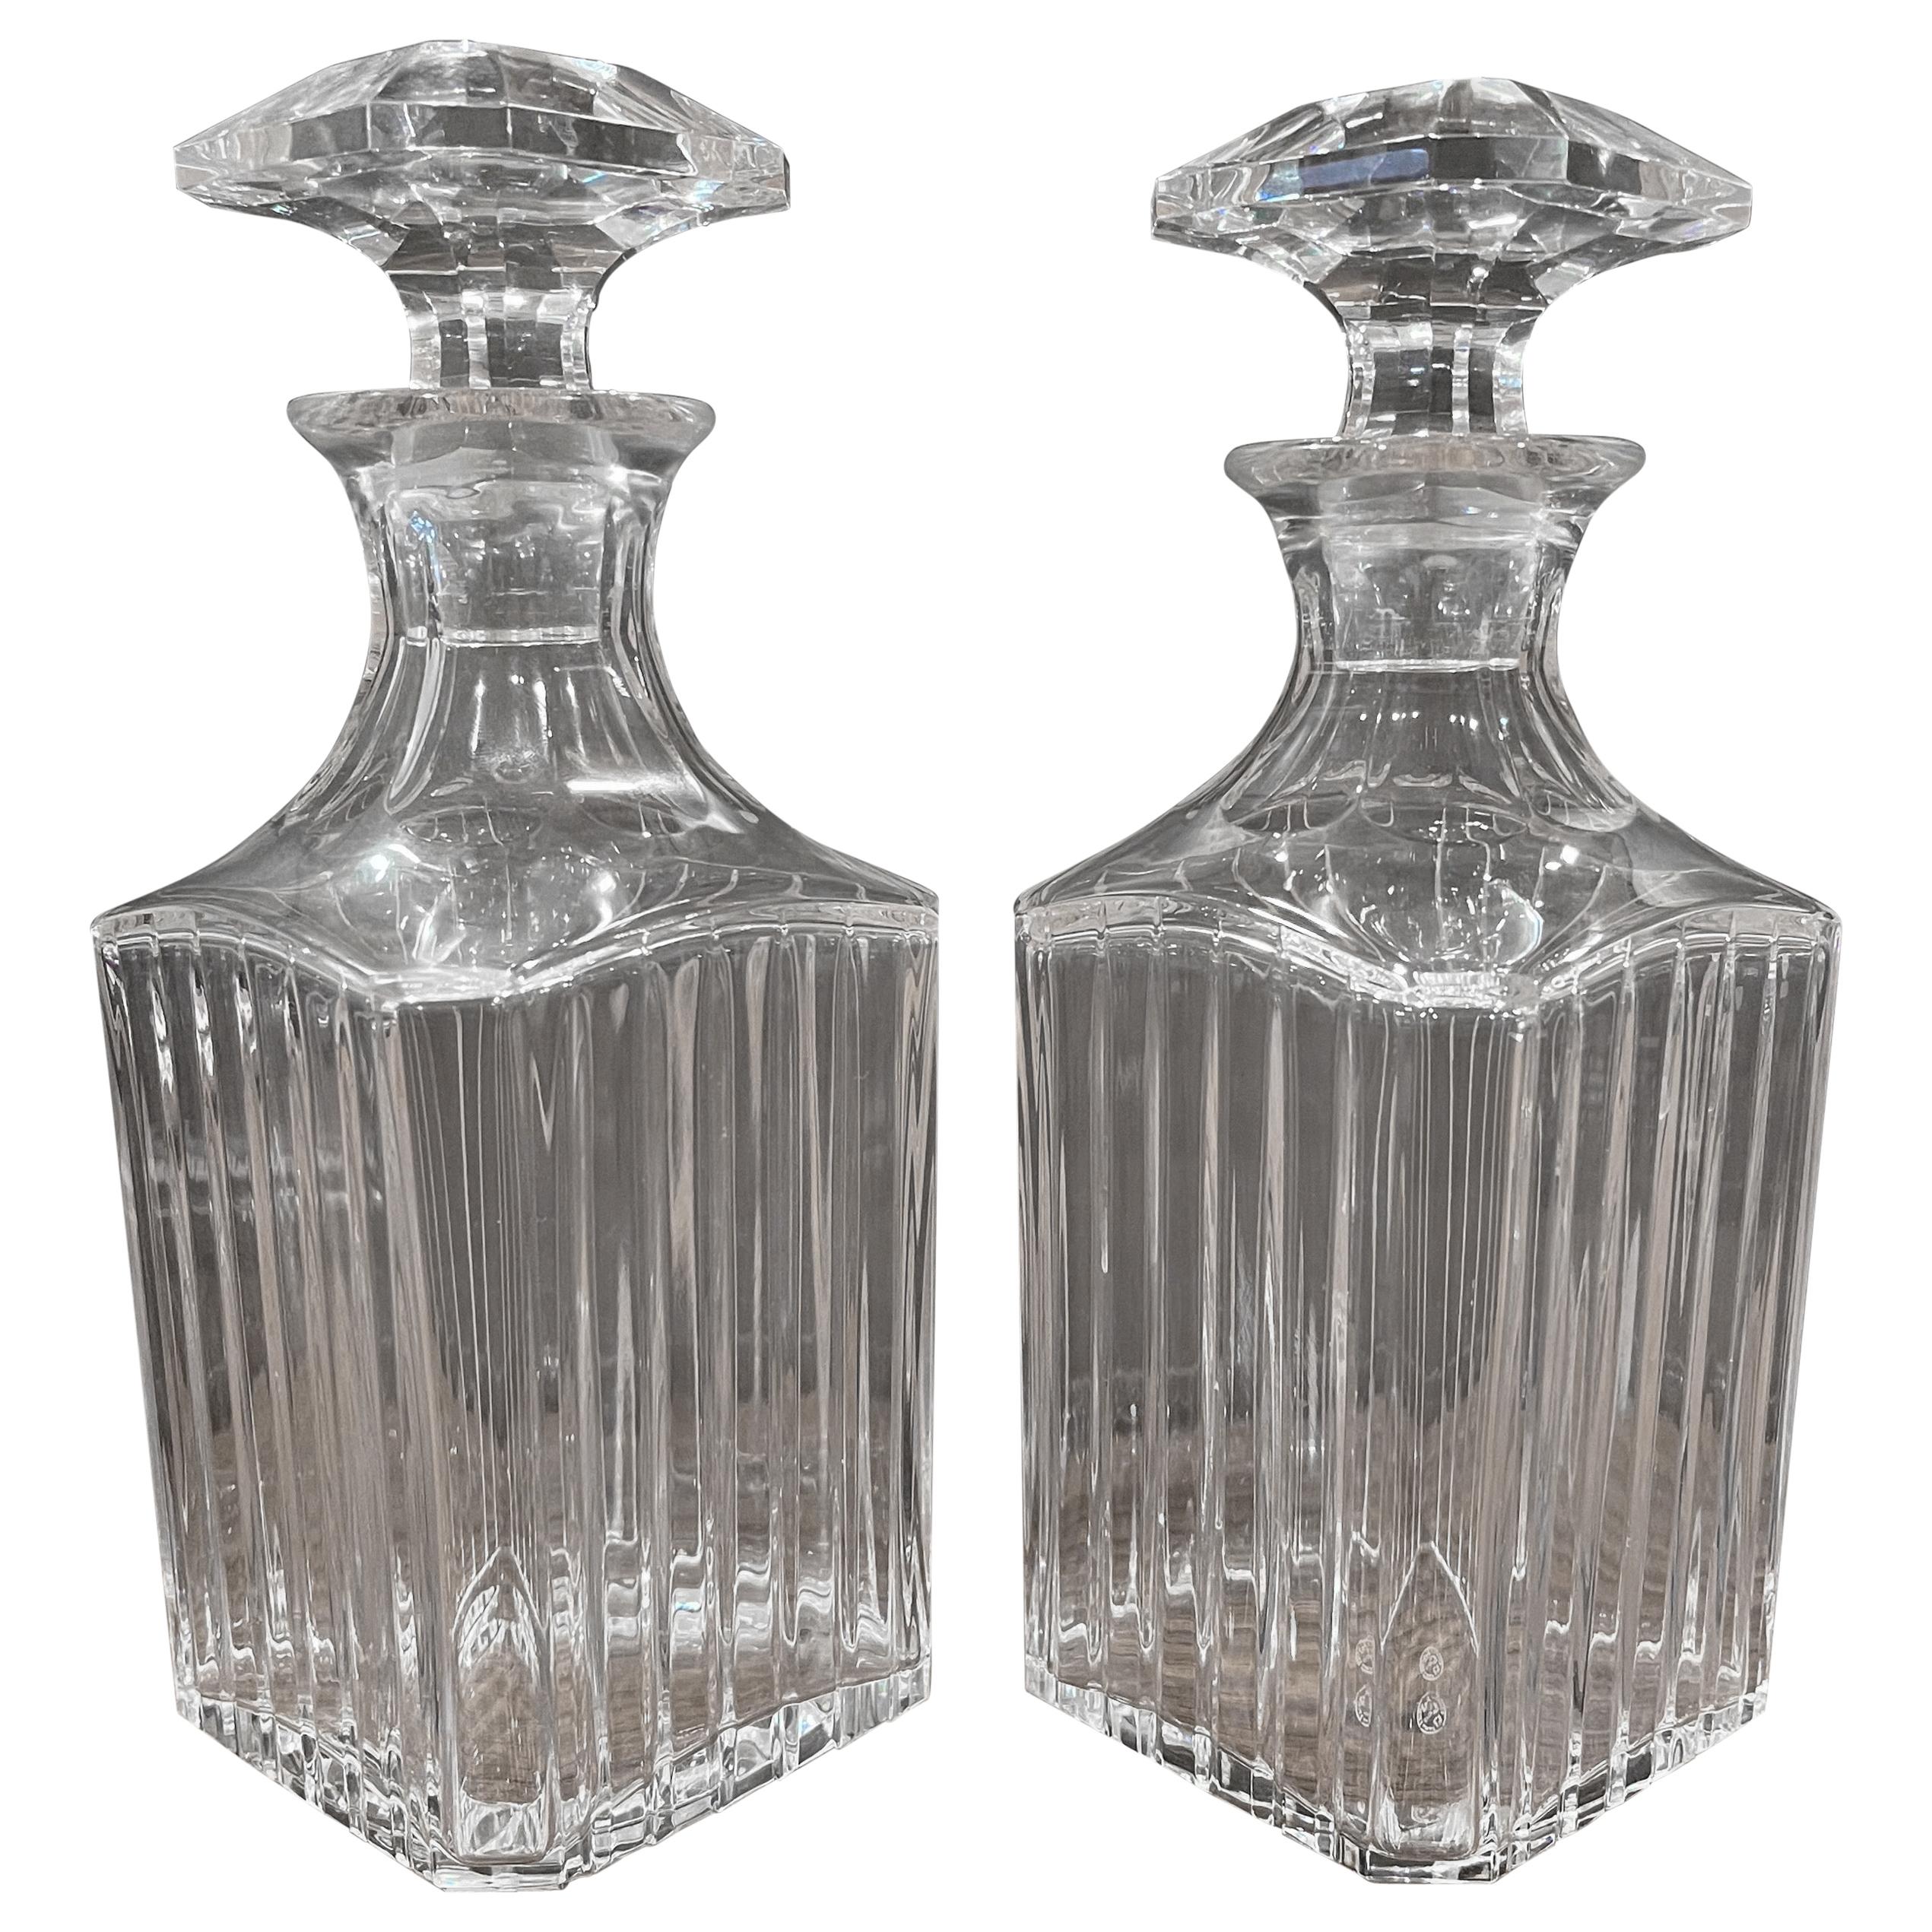 Pair of Crystal "Harmonie" Square Whiskey Decanters by Baccarat